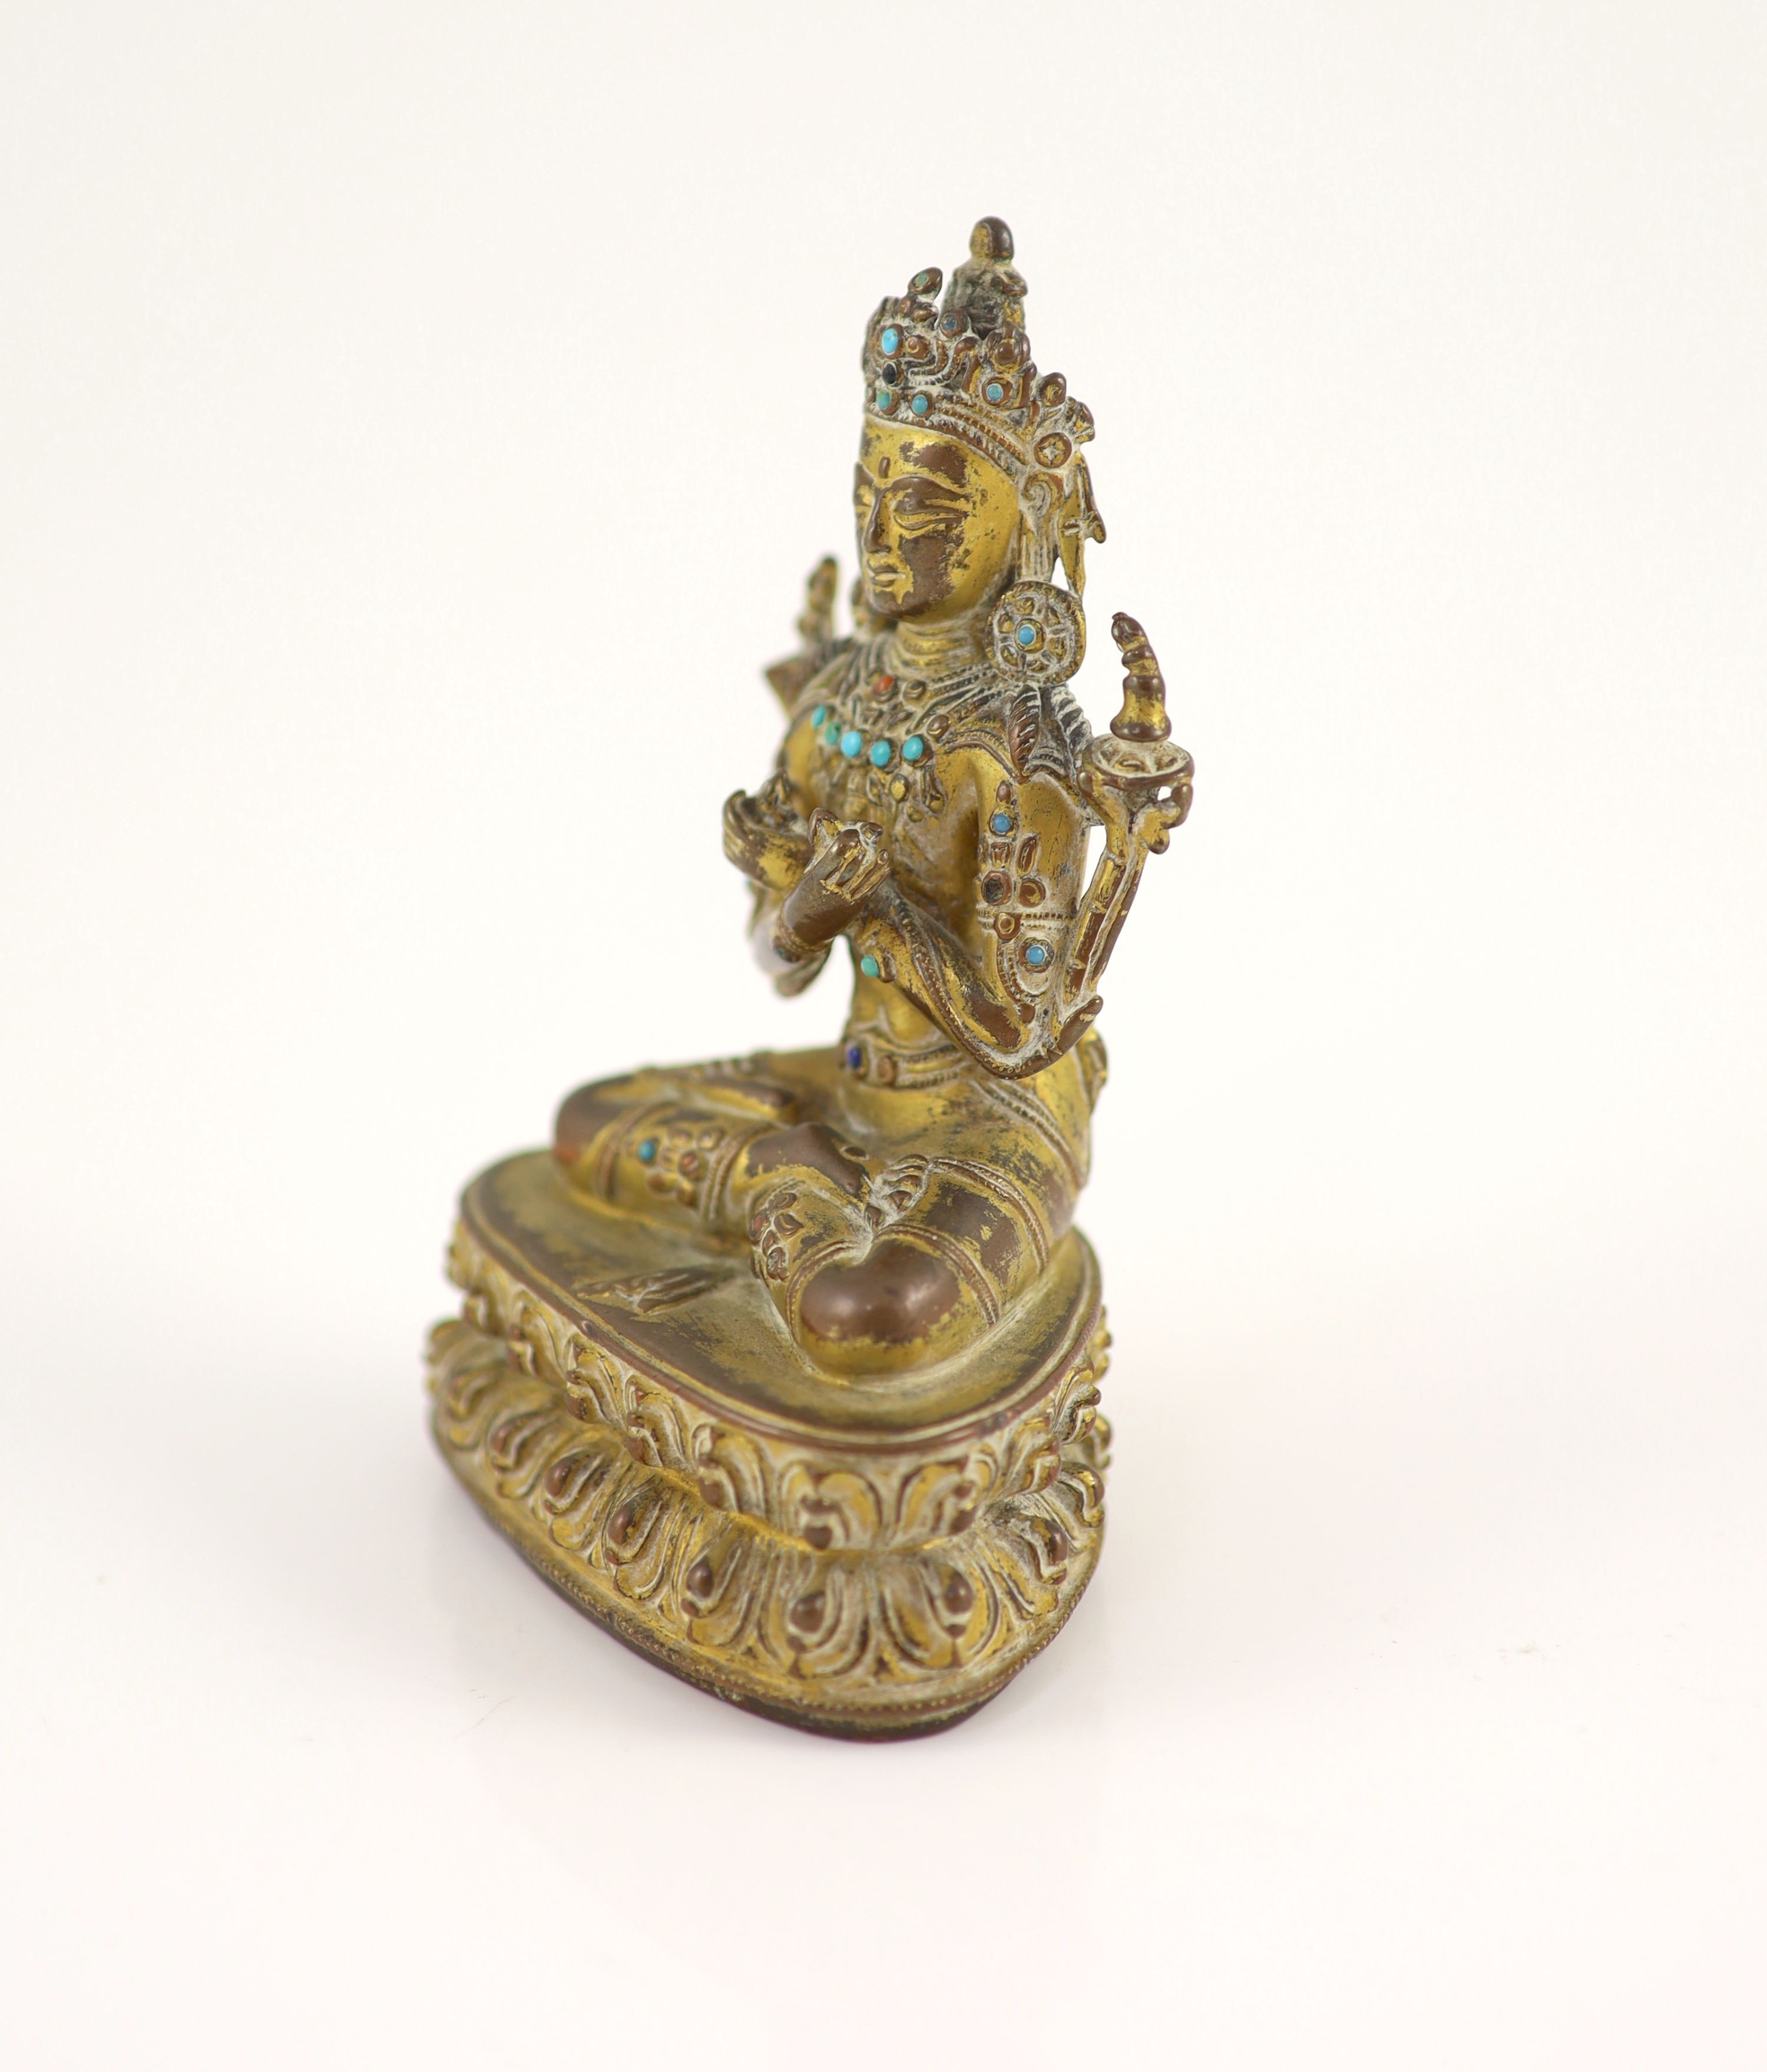 A Tibetan gilt copper alloy seated figure of Maitreya, possibly 15th century, 11.5 cm high